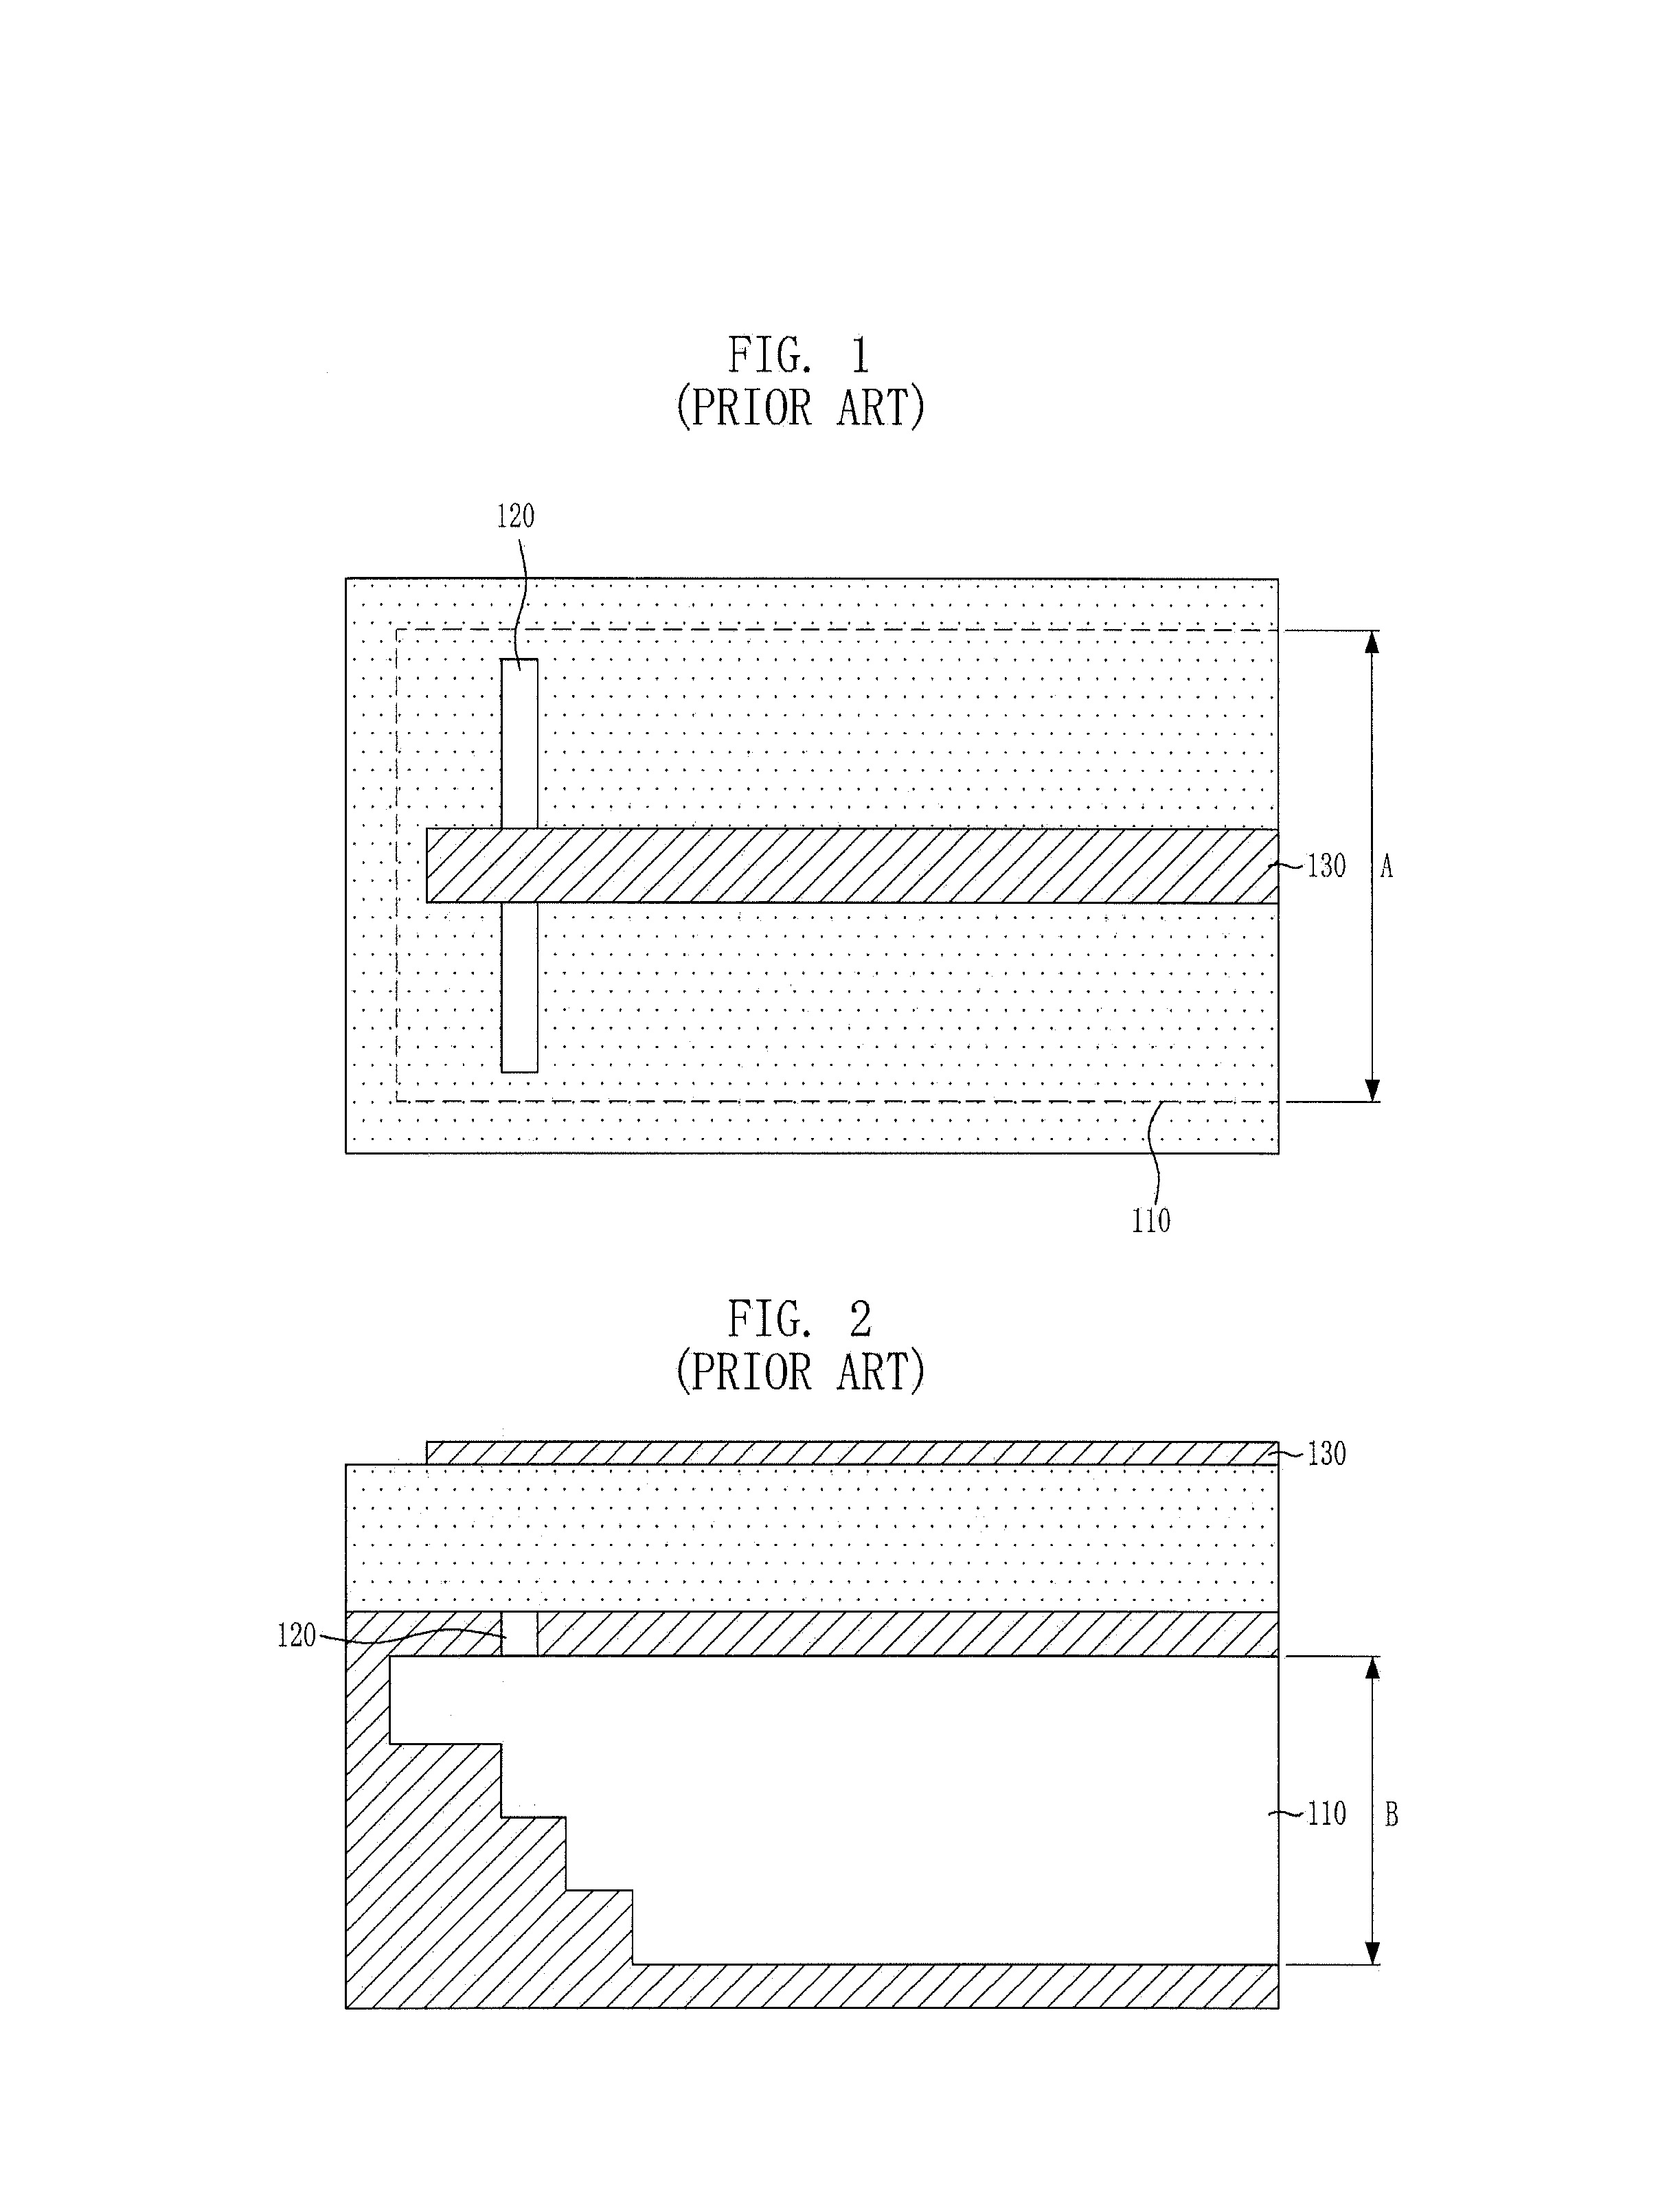 Apparatus for transitioning millimeter wave between dielectric waveguide and transmission line